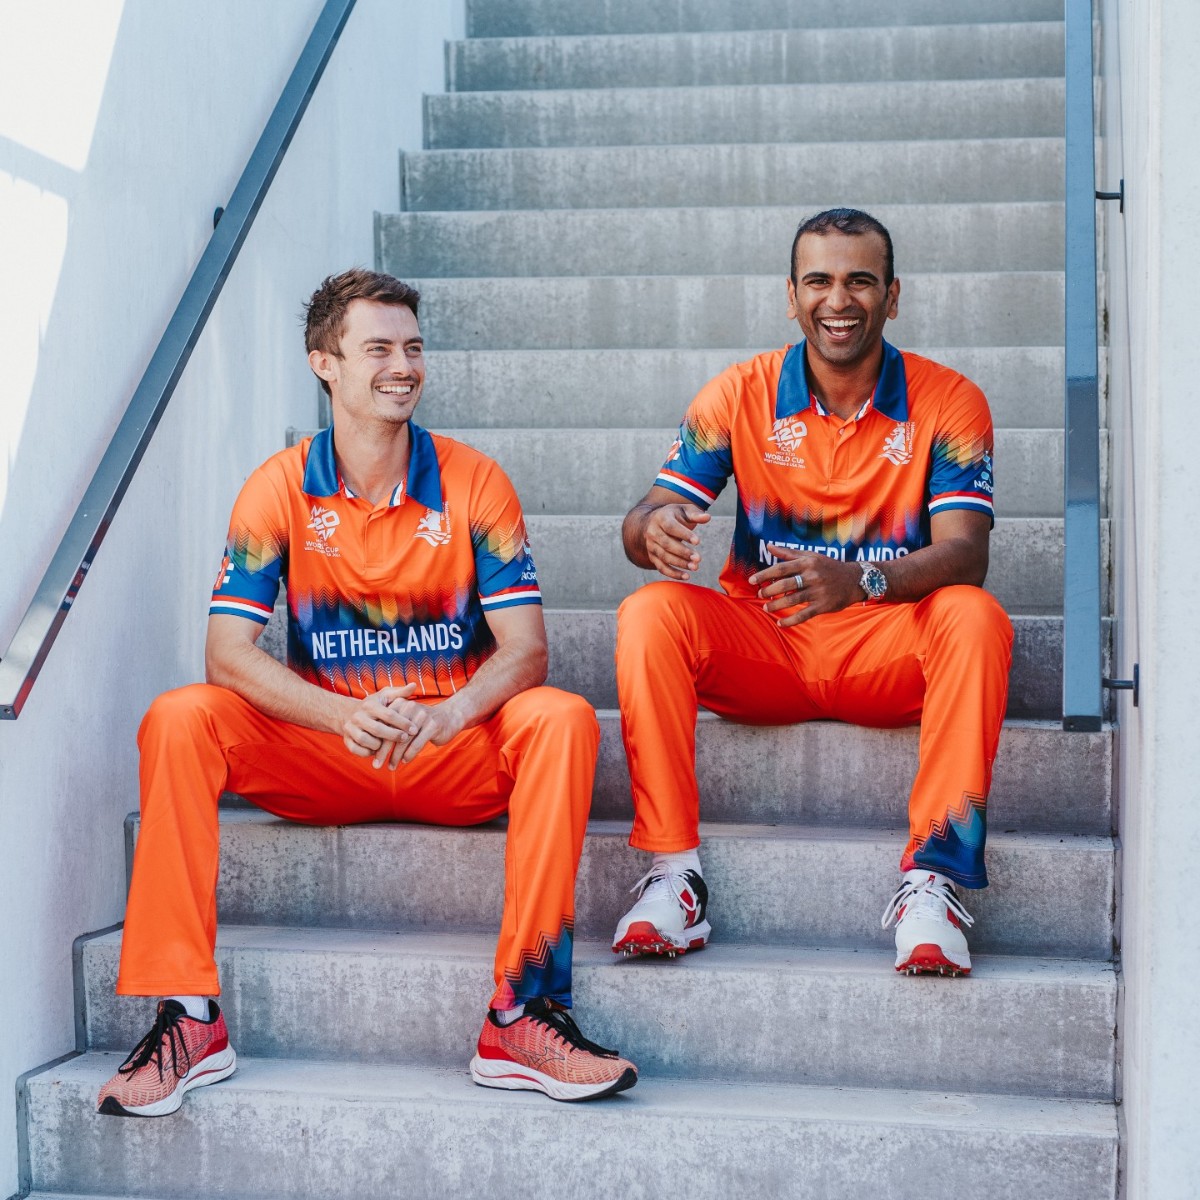 The throwback you didn't know you needed. 2024 meets 1996 with @kncbcricket's new T20 World Cup shirt #T20WorldCup #netherlandscricket #cricket #Nordek